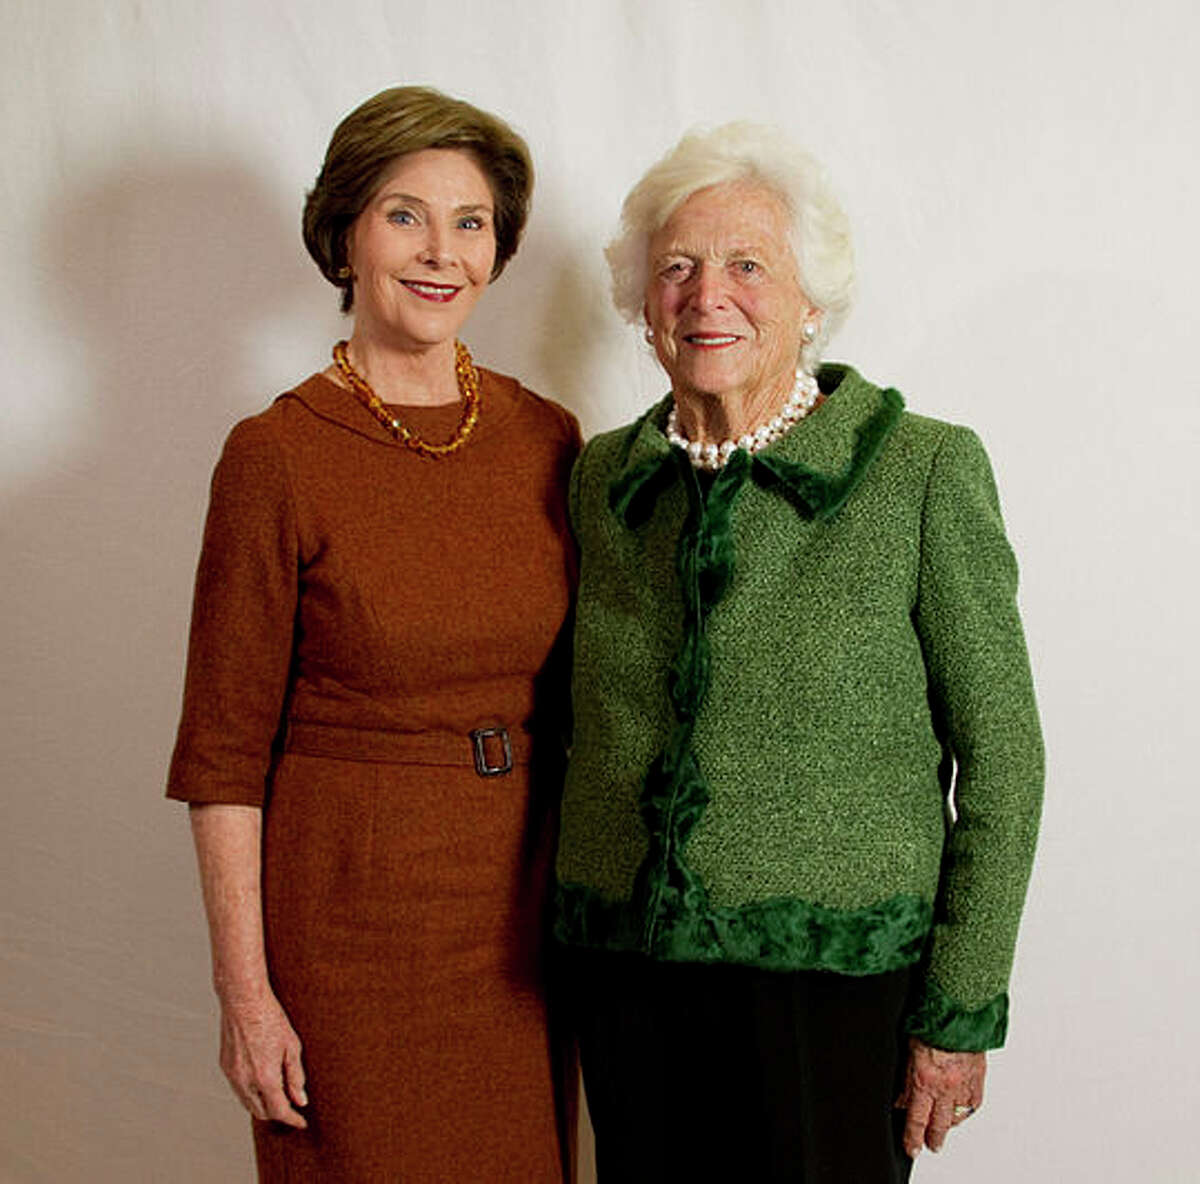 Former First Ladies Barbara and Laura Bush pledged a combined $2 million to help public schools and libraries after Hurricanes Harvey and Irma.